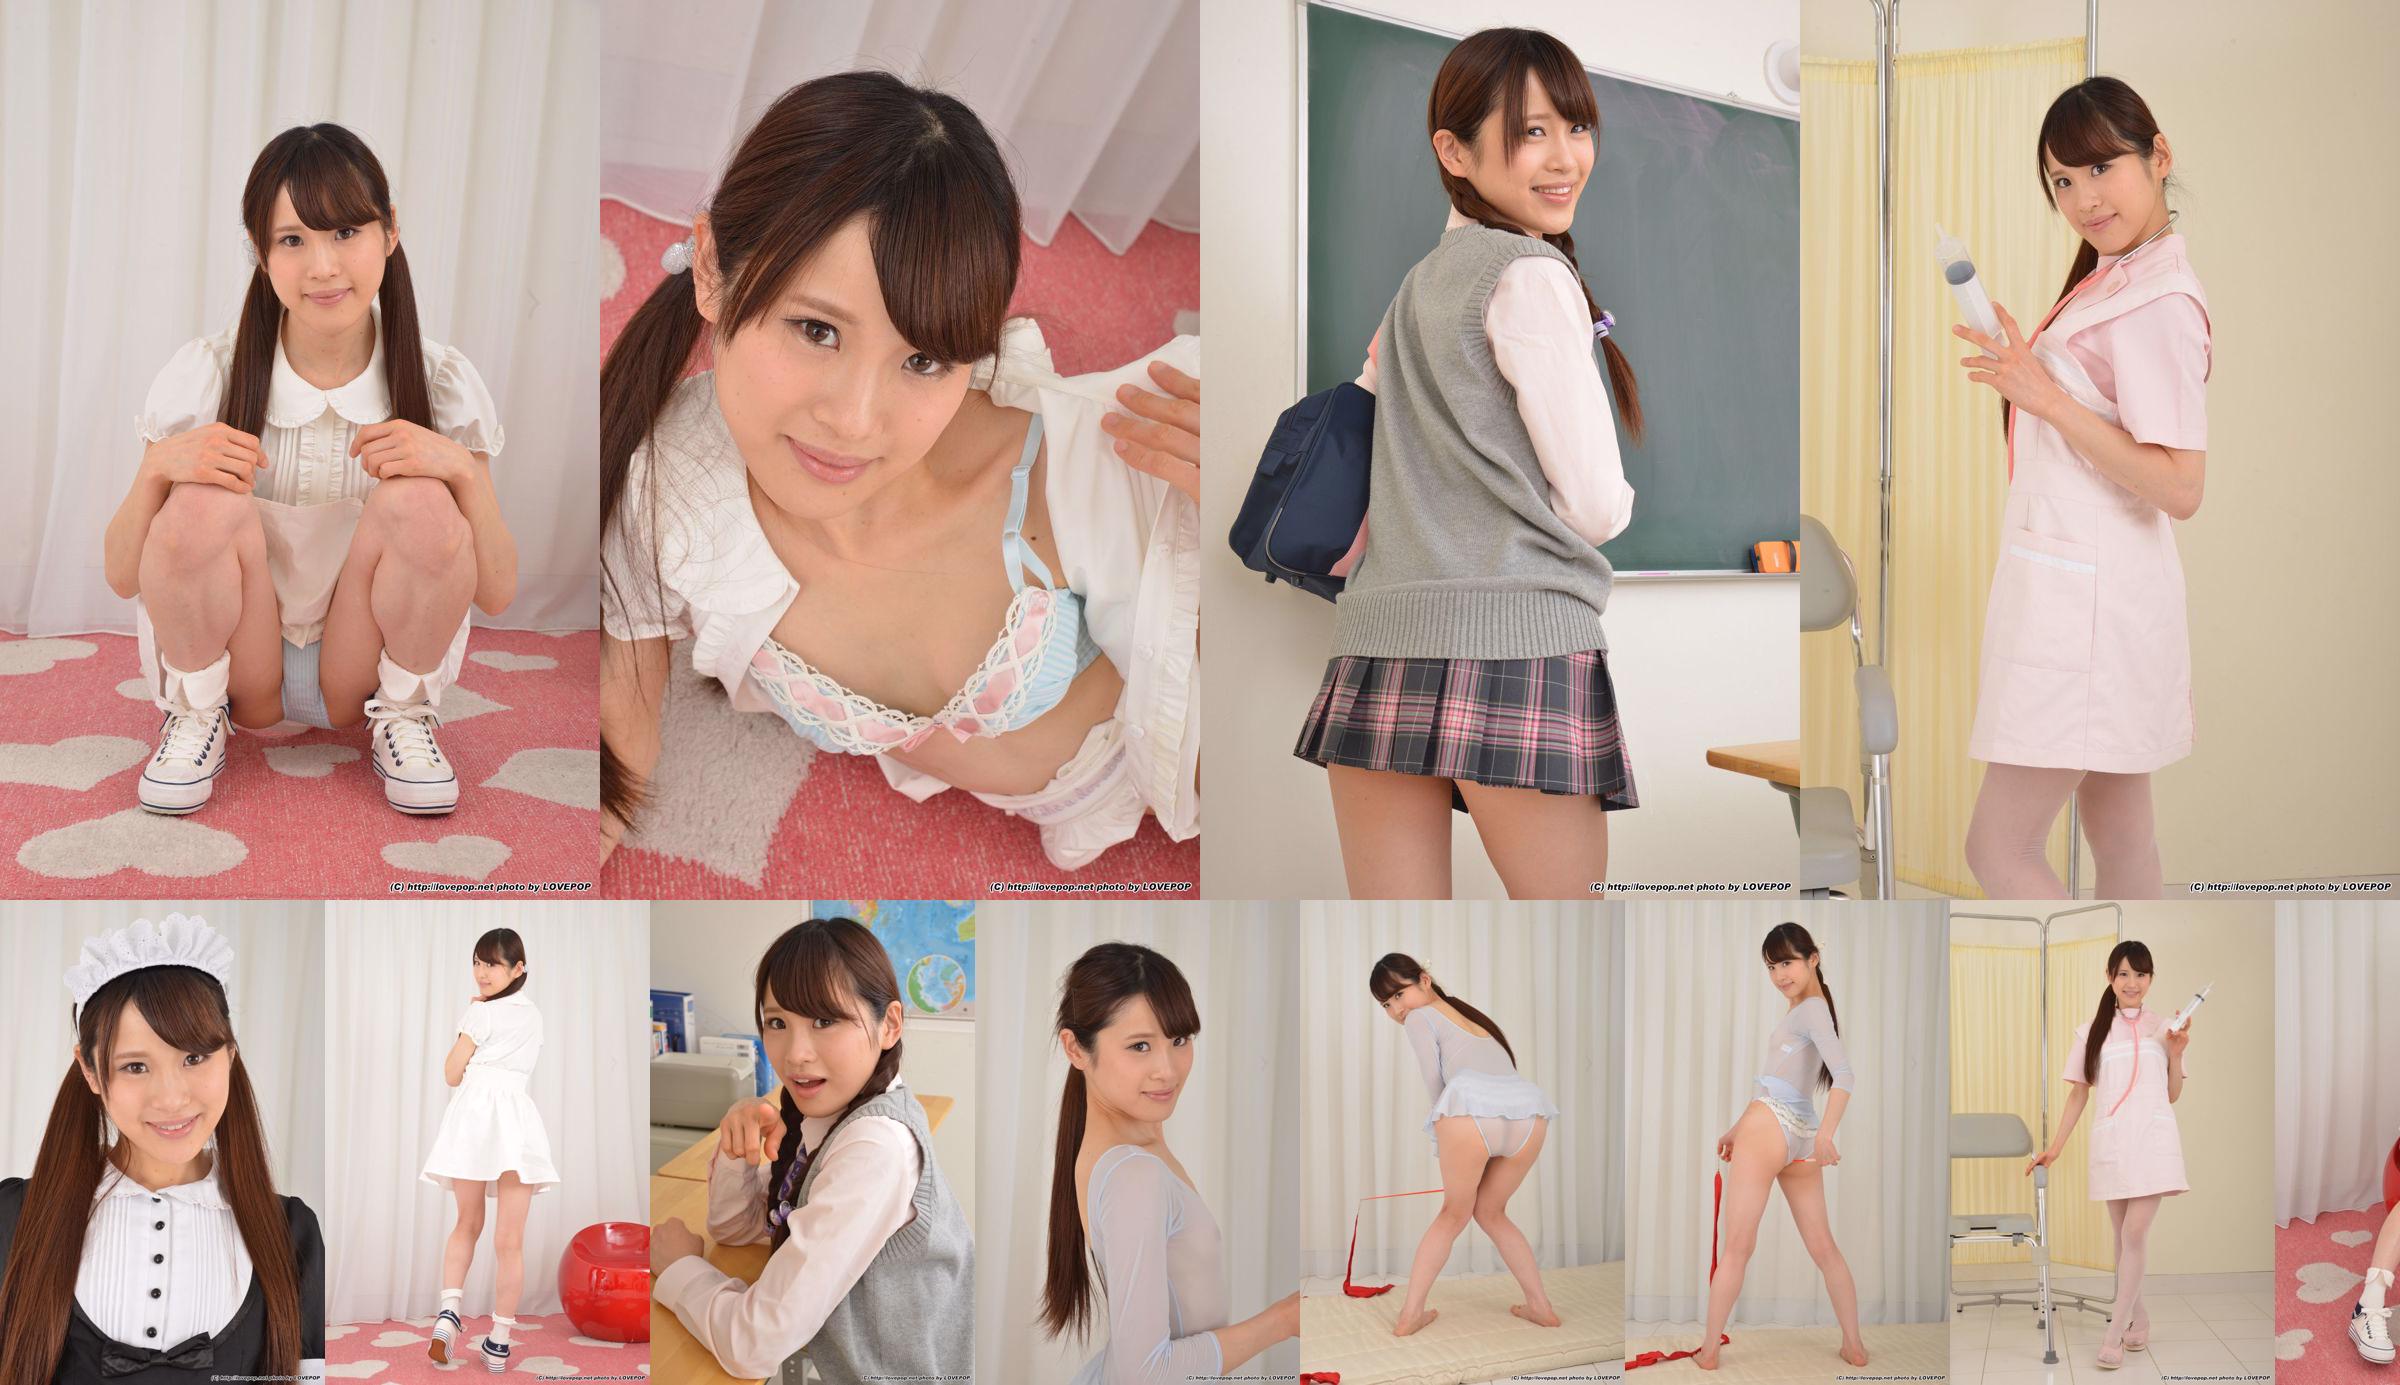 [LovePop] Chihiro Yuikawa "Perspective Gym Suit" No.cabf0e Page 1